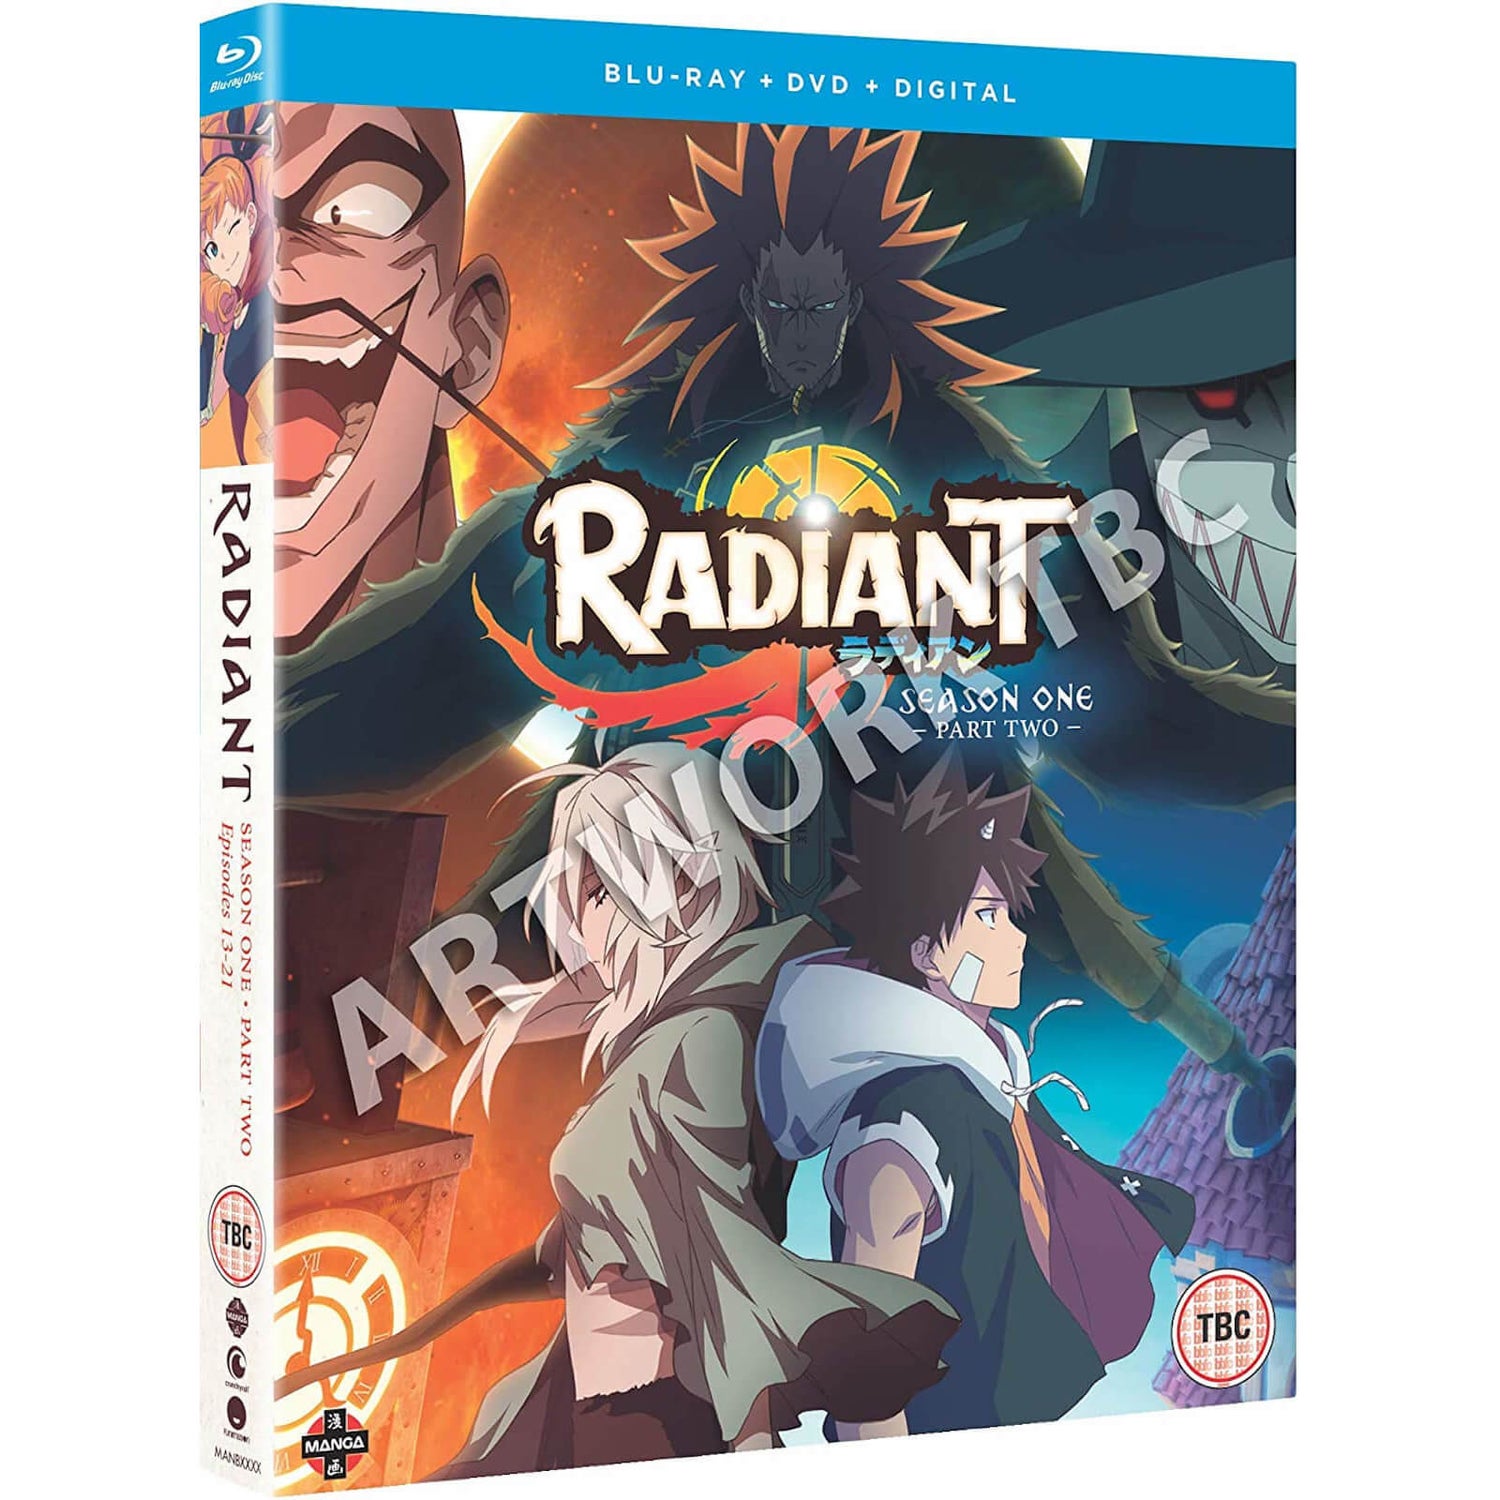 RADIANT: Season One Part Two - Limited Edition